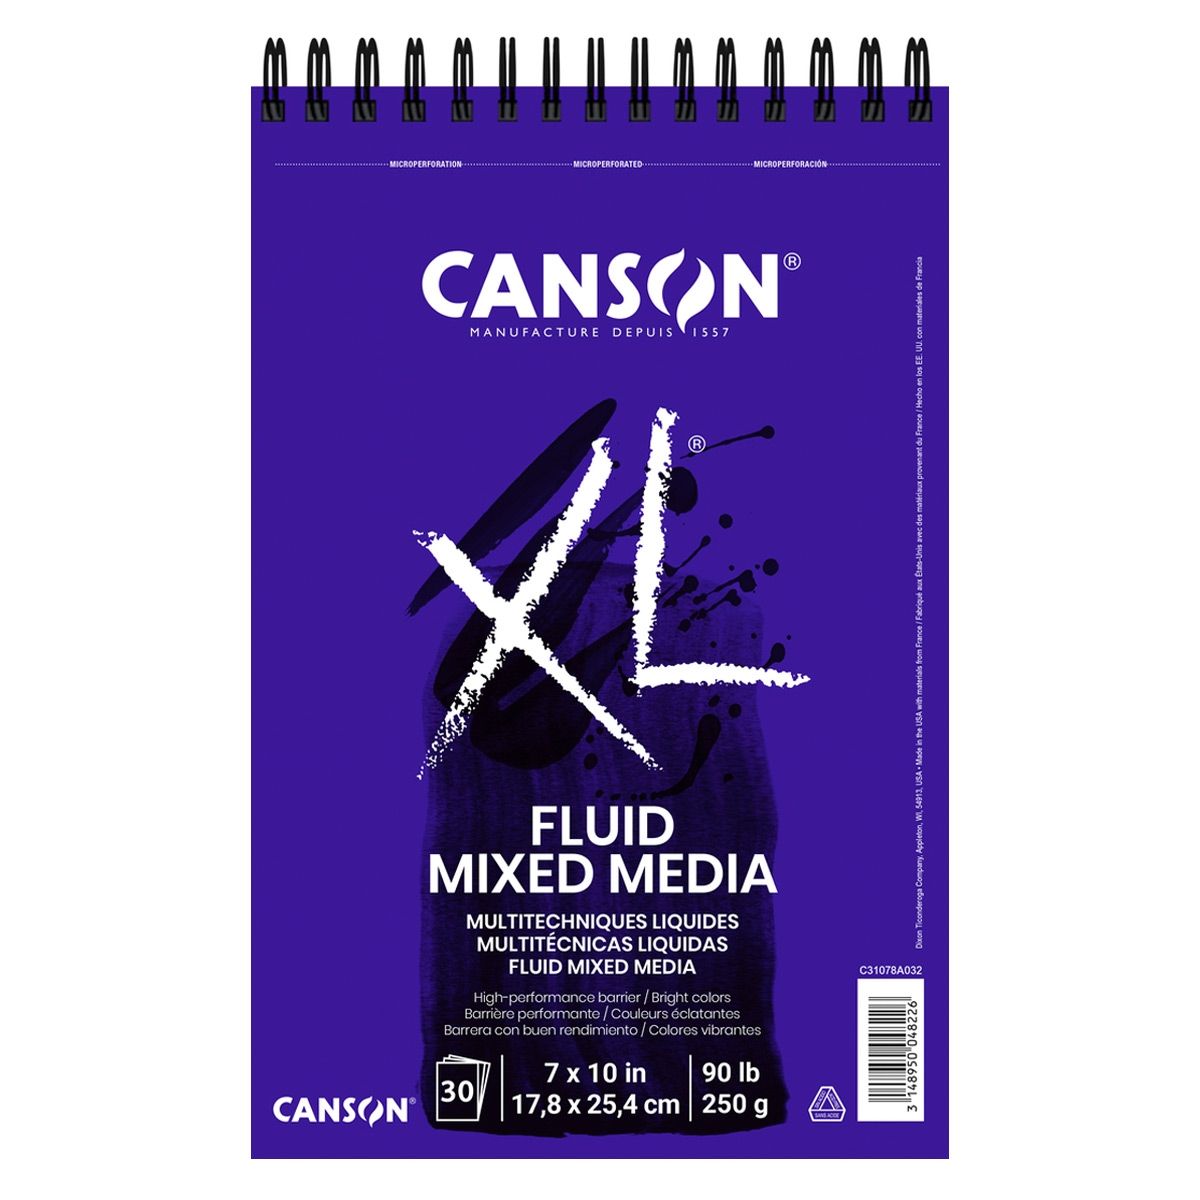 Canson XL Fluid Mixed Media 7x10 Spiral Pad 30 Sheets